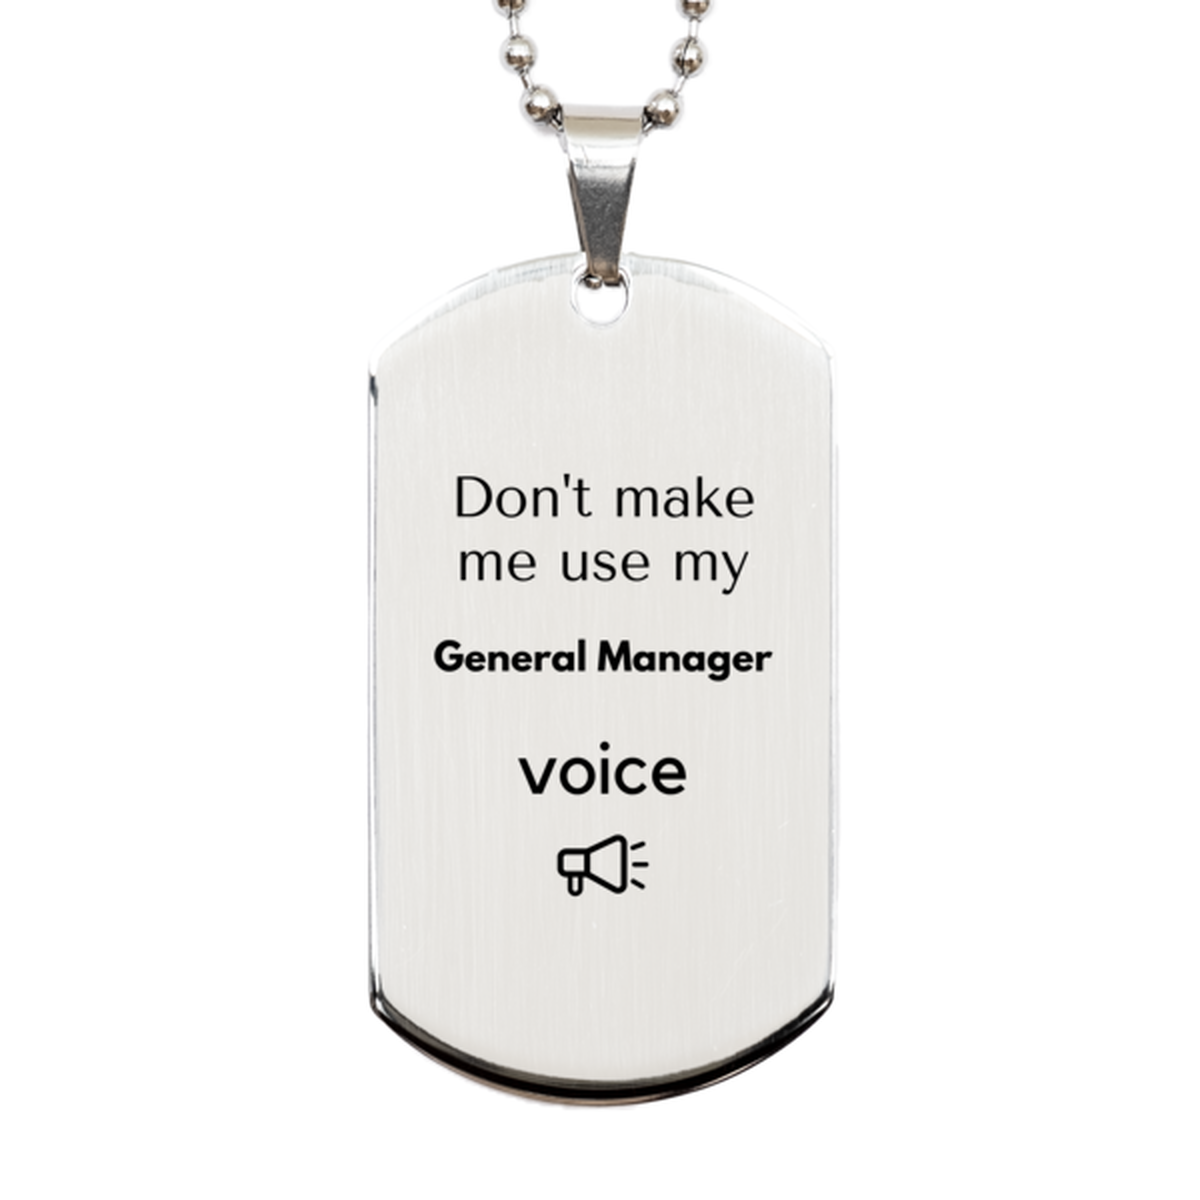 Don't make me use my General Manager voice, Sarcasm General Manager Gifts, Christmas General Manager Silver Dog Tag Birthday Unique Gifts For General Manager Coworkers, Men, Women, Colleague, Friends